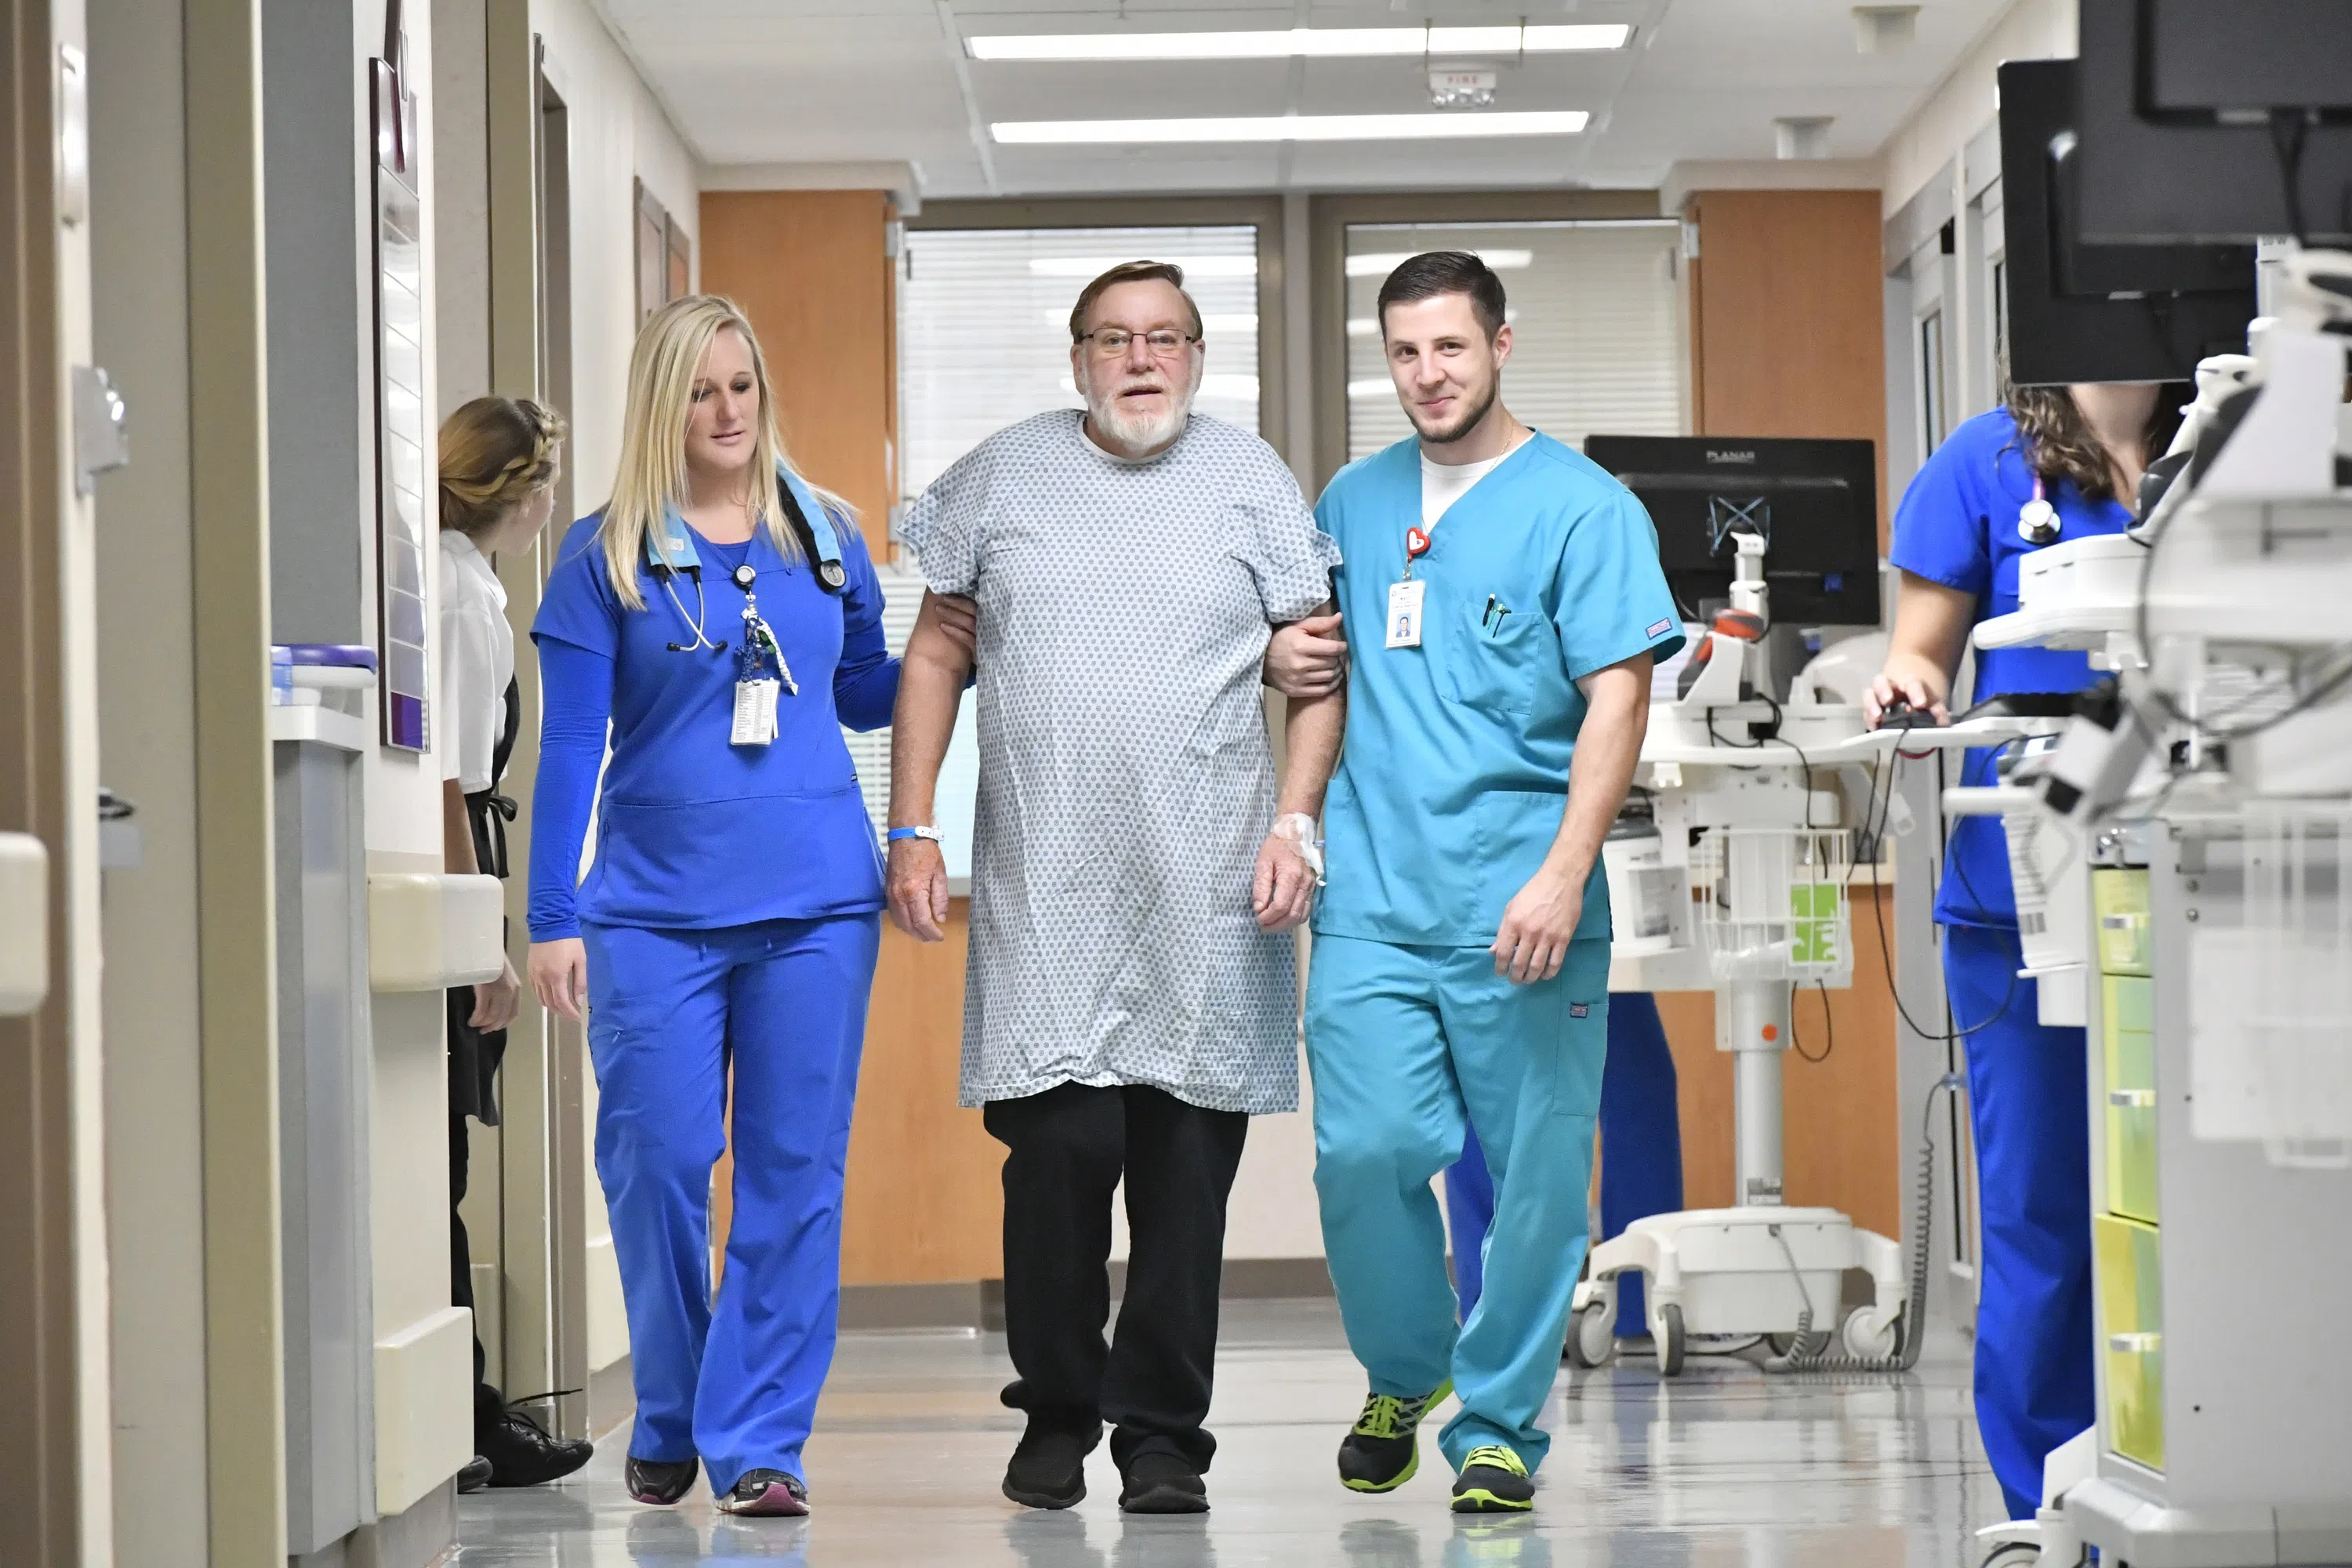 A patient is walked down the hall by two nurses.